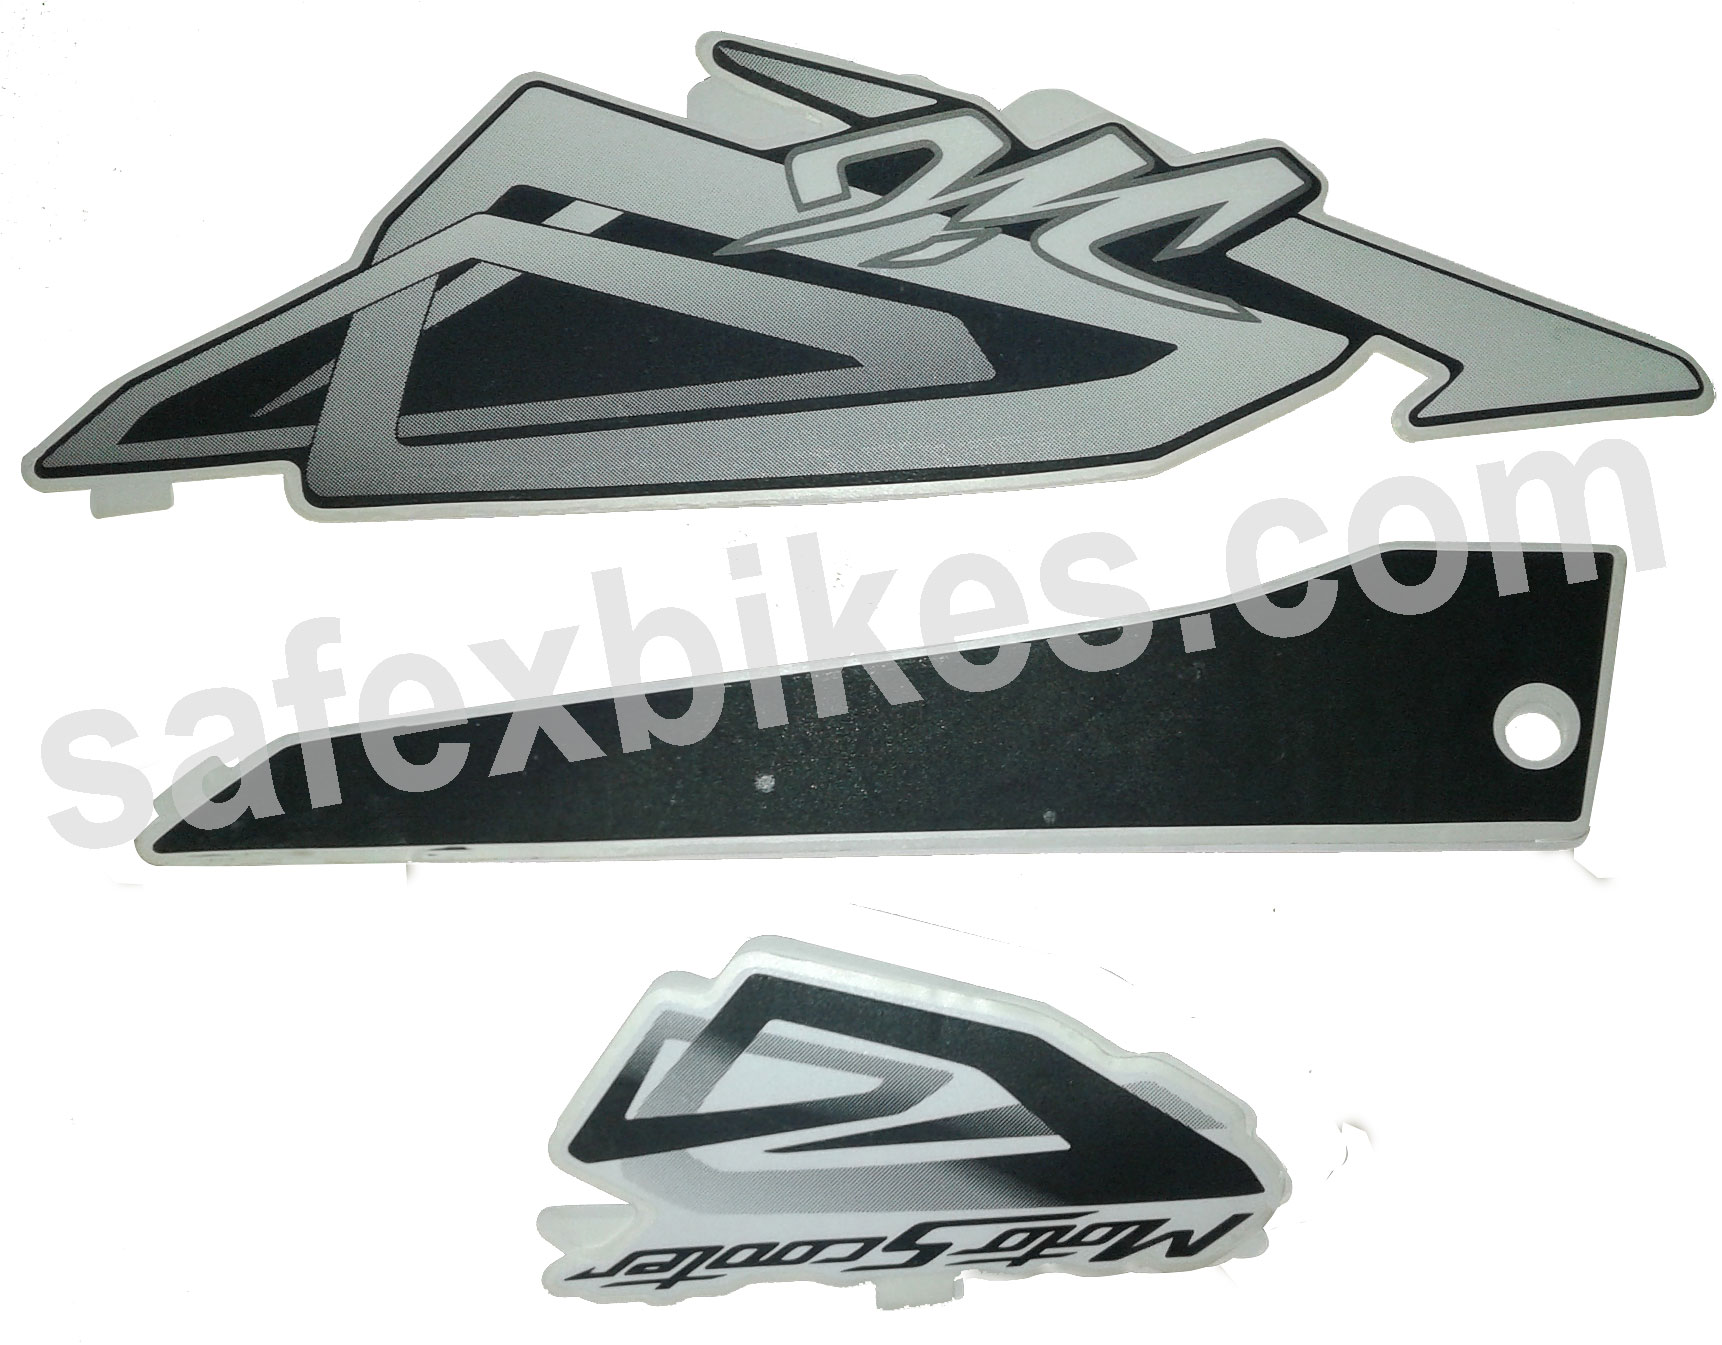 Complete Sticker Kit Dio 110 2015 Zadon Motorcycle Parts For